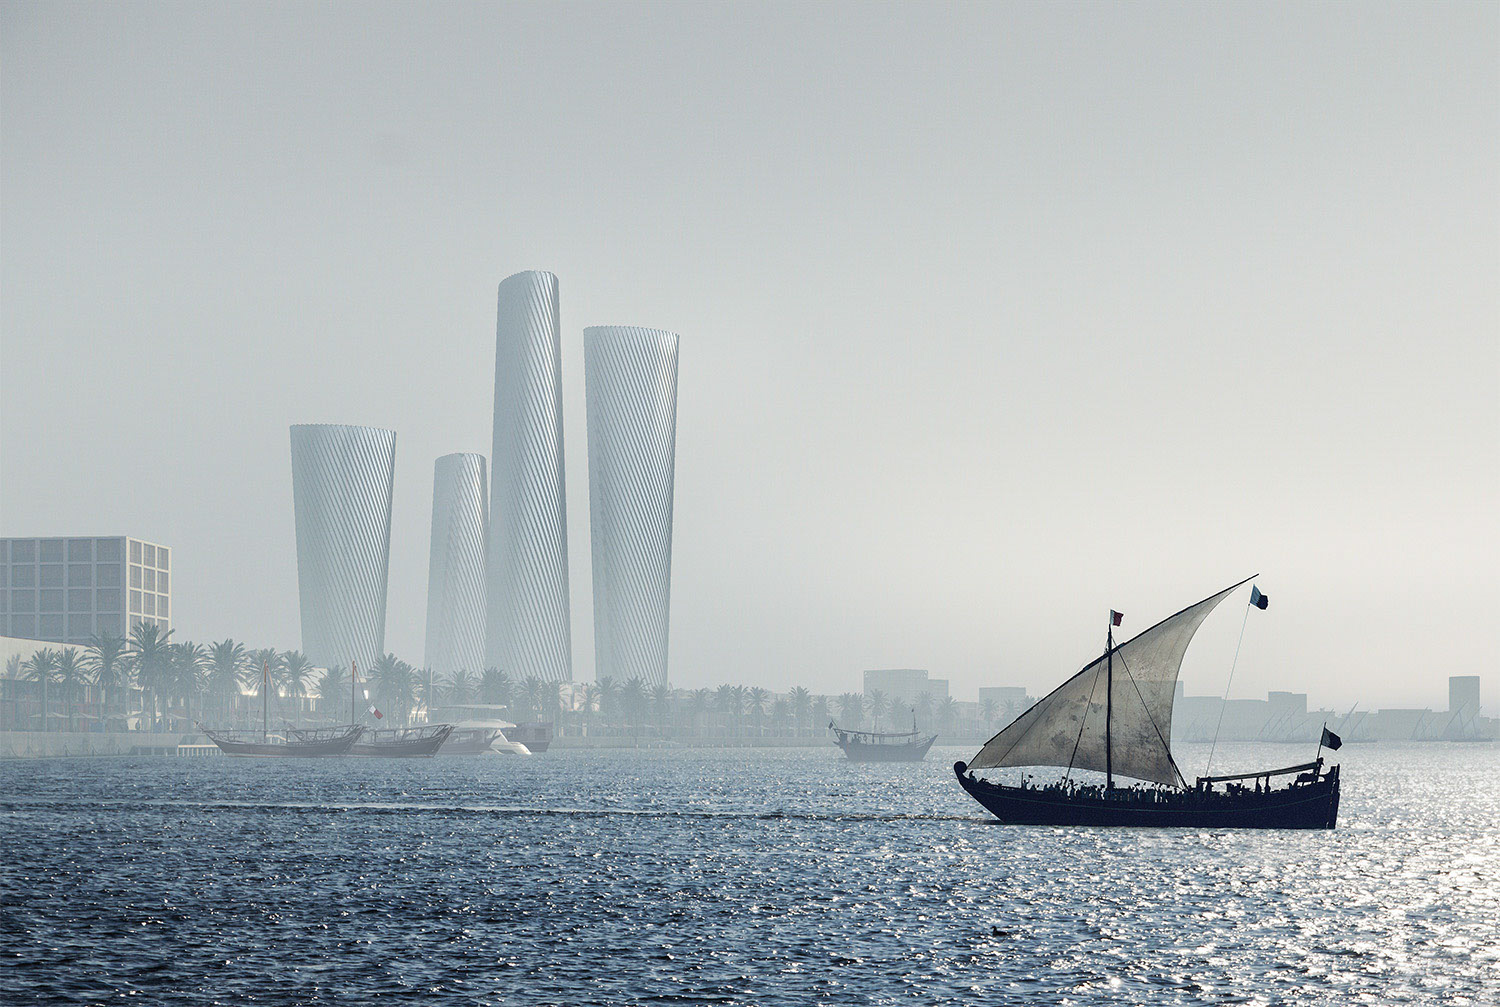 Architectural visualization of Lusail Towers for Foster & Partners. An image of sail boat in the sea with four skyscrape buildings in the background in daylight.